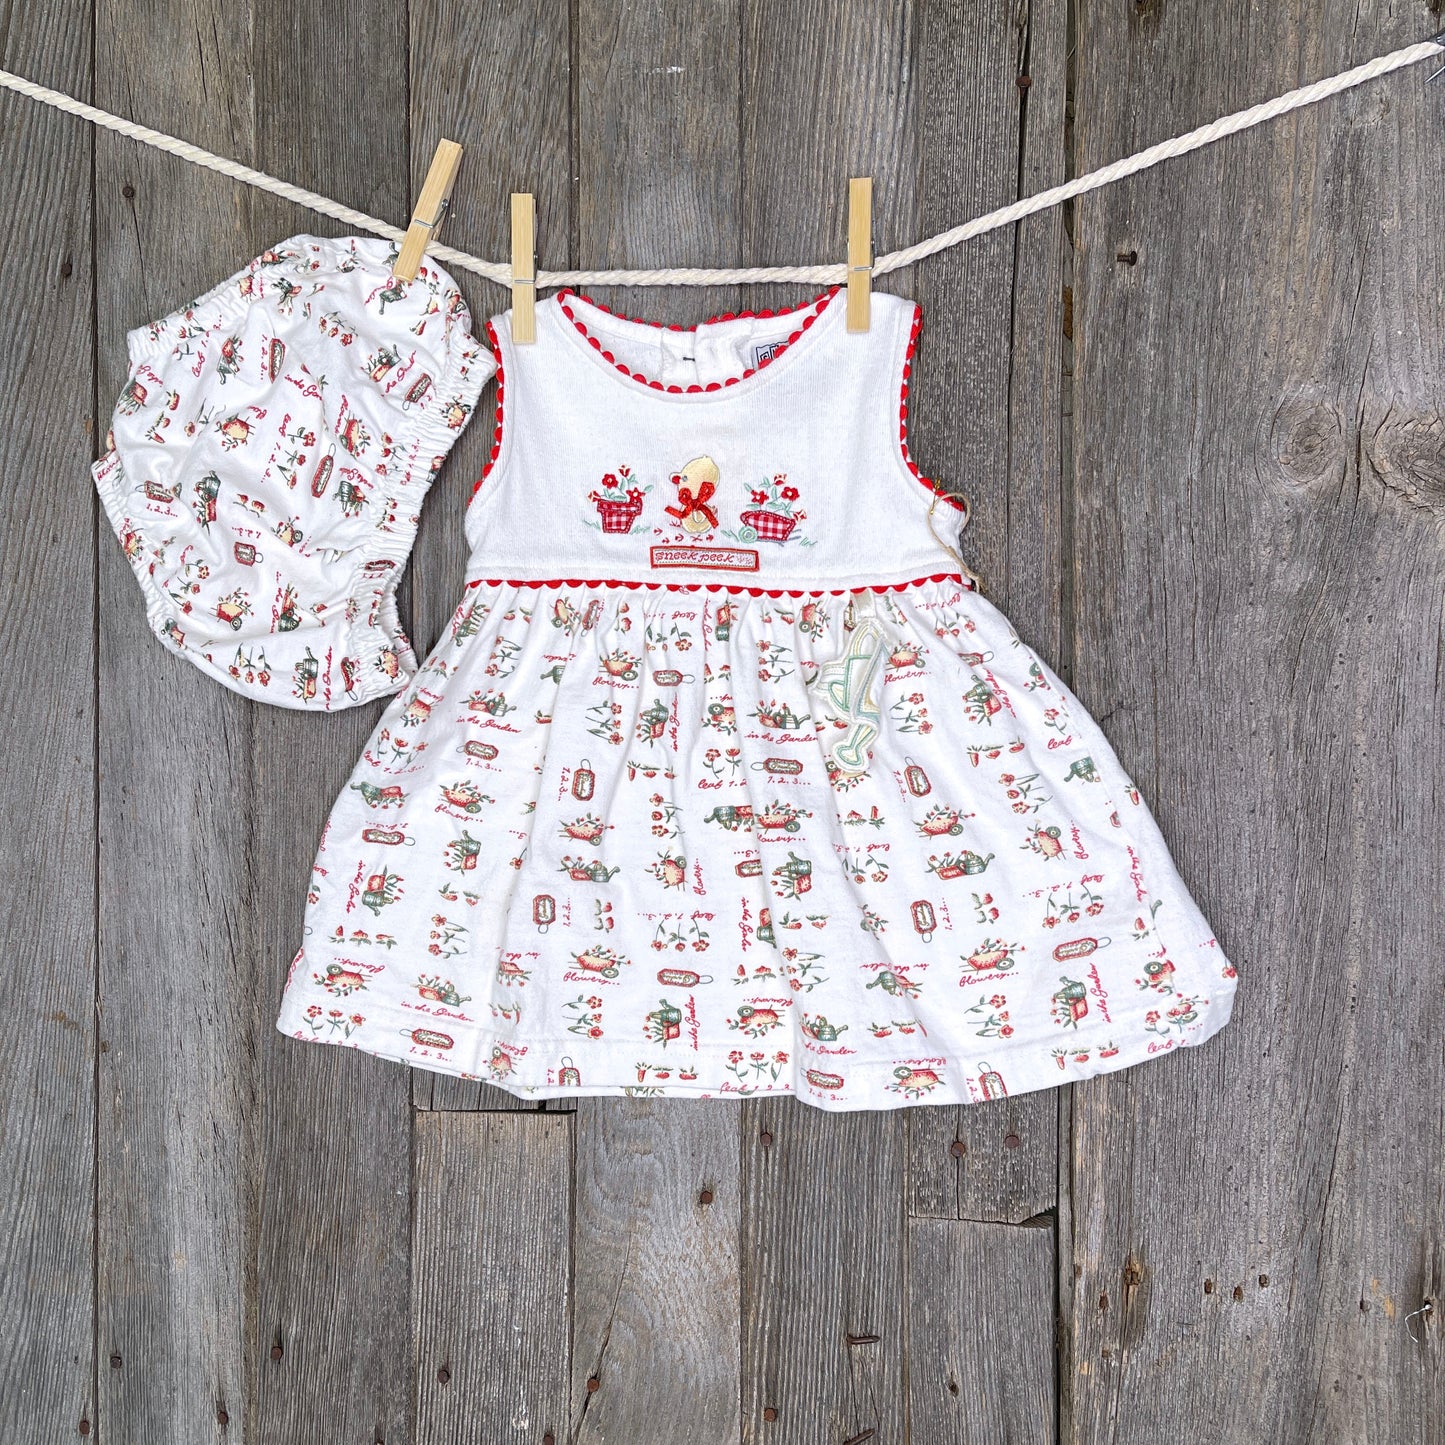 Two Piece Outfit Dress 6-9 Months BCP (7249909612722)